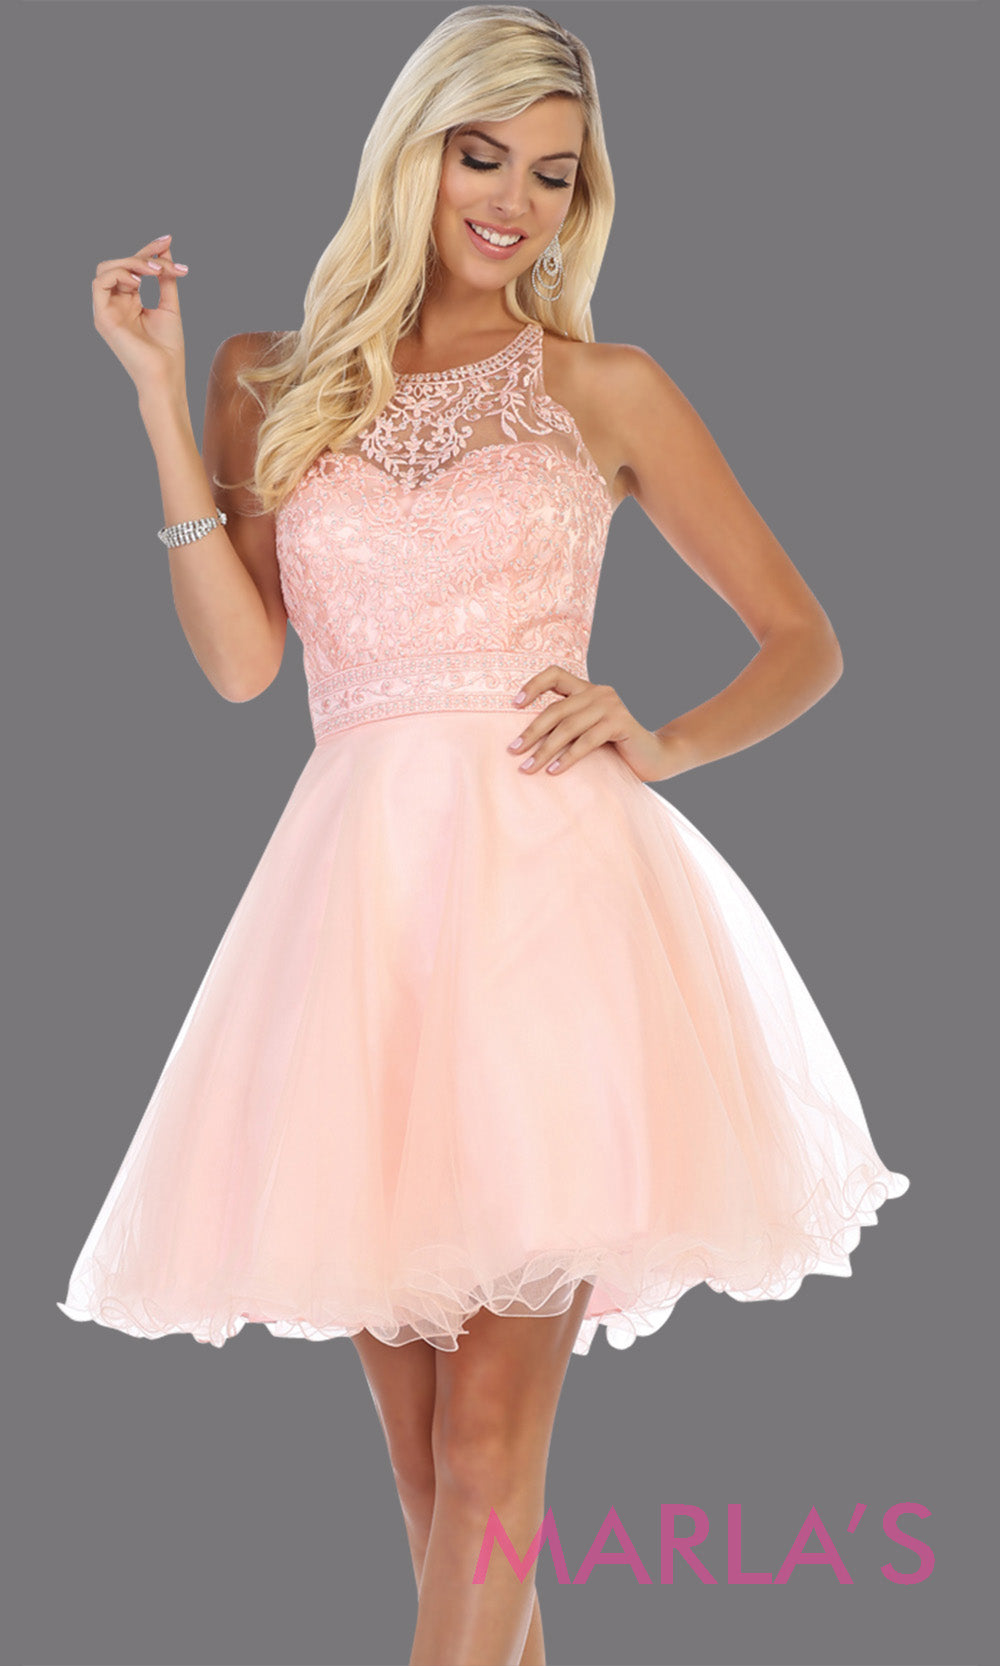 Short high neck blush pink grade 8 graduation dress with puffy skirt from mayqueen. This light pink cross back dress is perfect for plus size grad, homecoming, Bat Mitzvah, quinceanera damas, middle school graduation, junior bridesmaidsgrade 8 grad dresses, graduation dresses